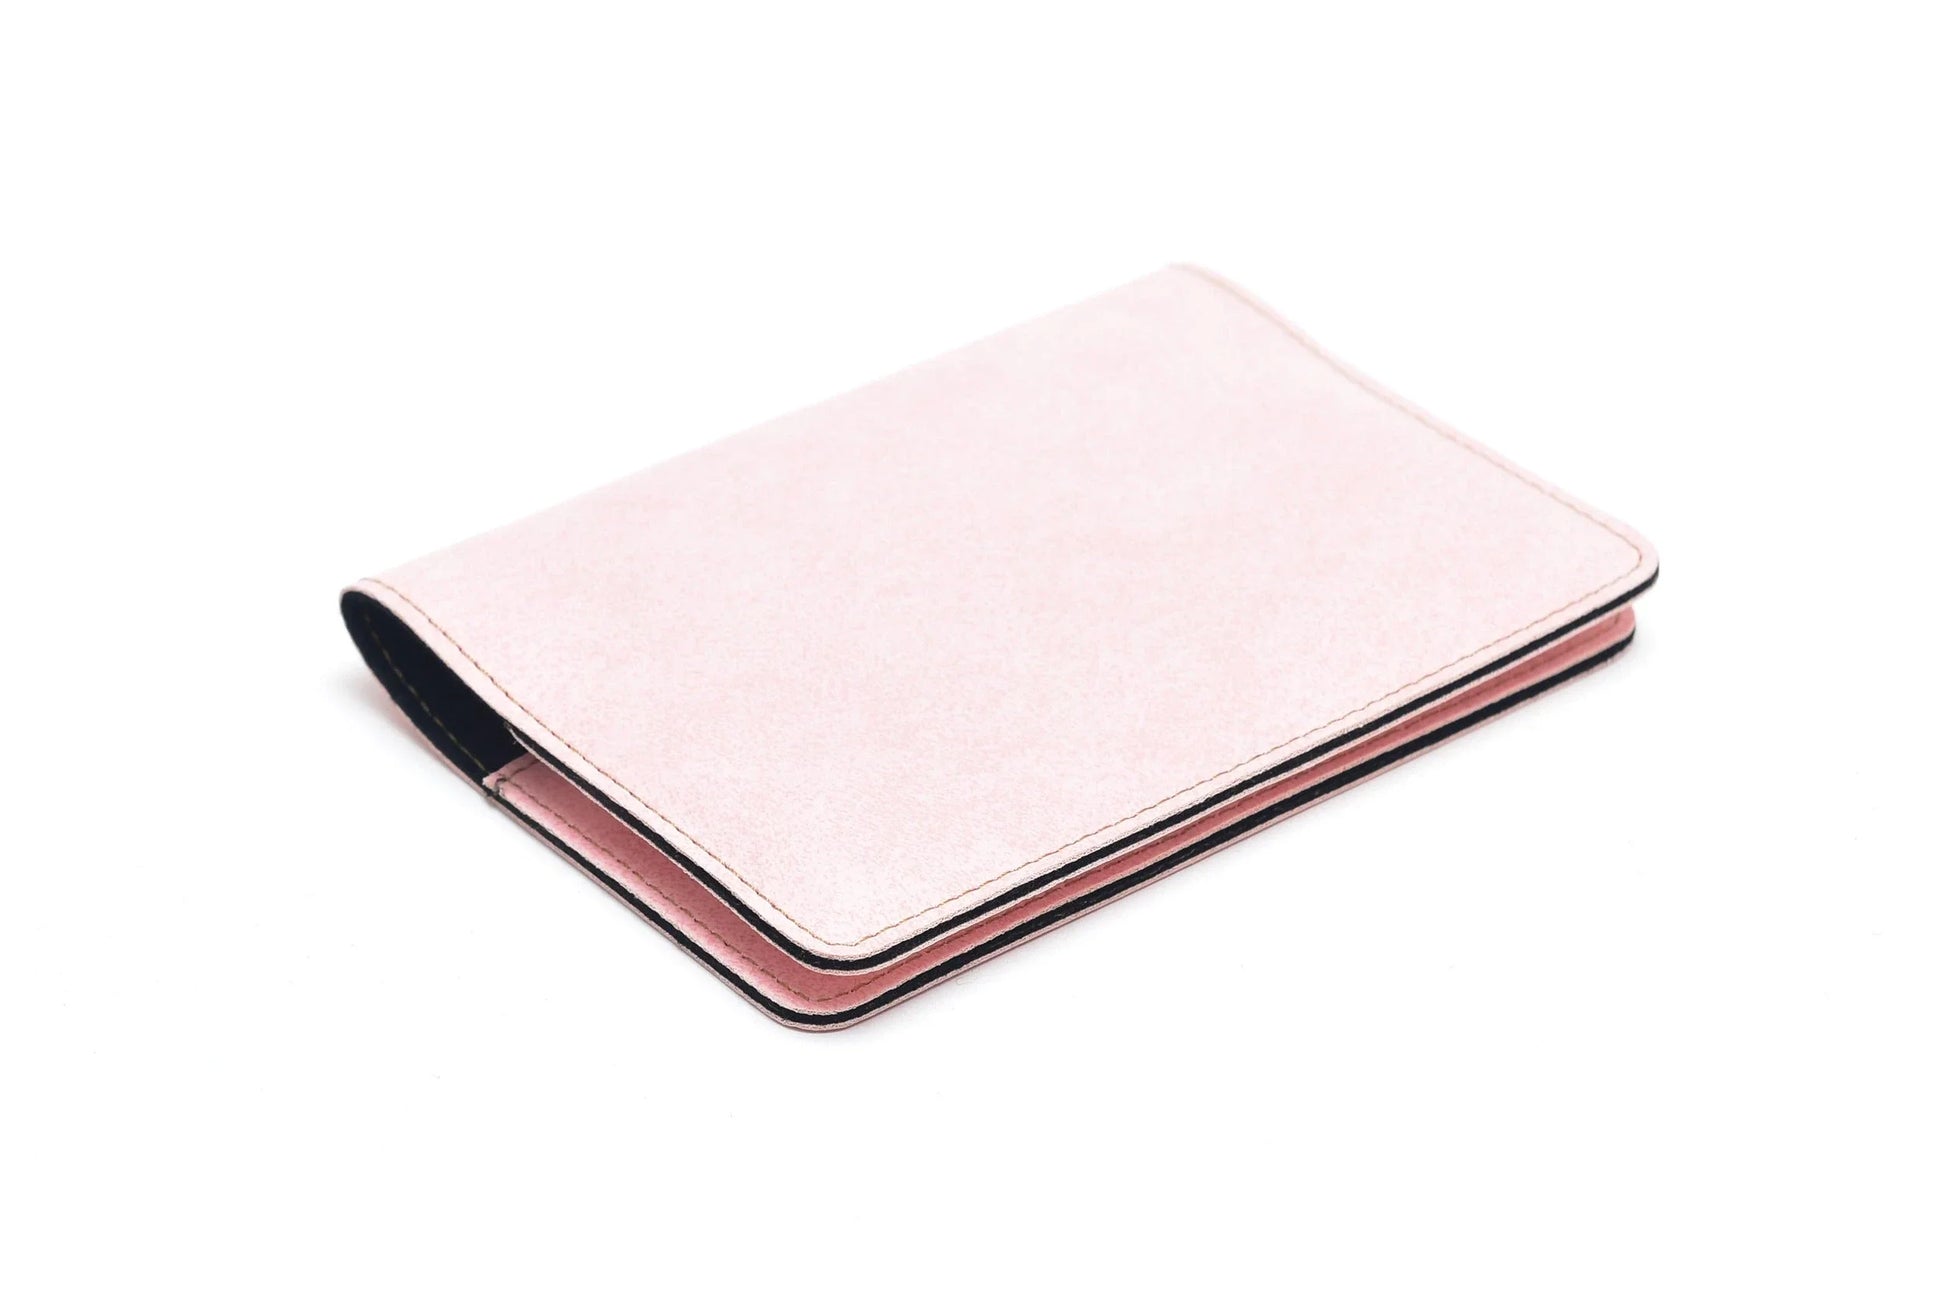 Make your passport stand out with a customized leather case that is a true reflection of your personality.